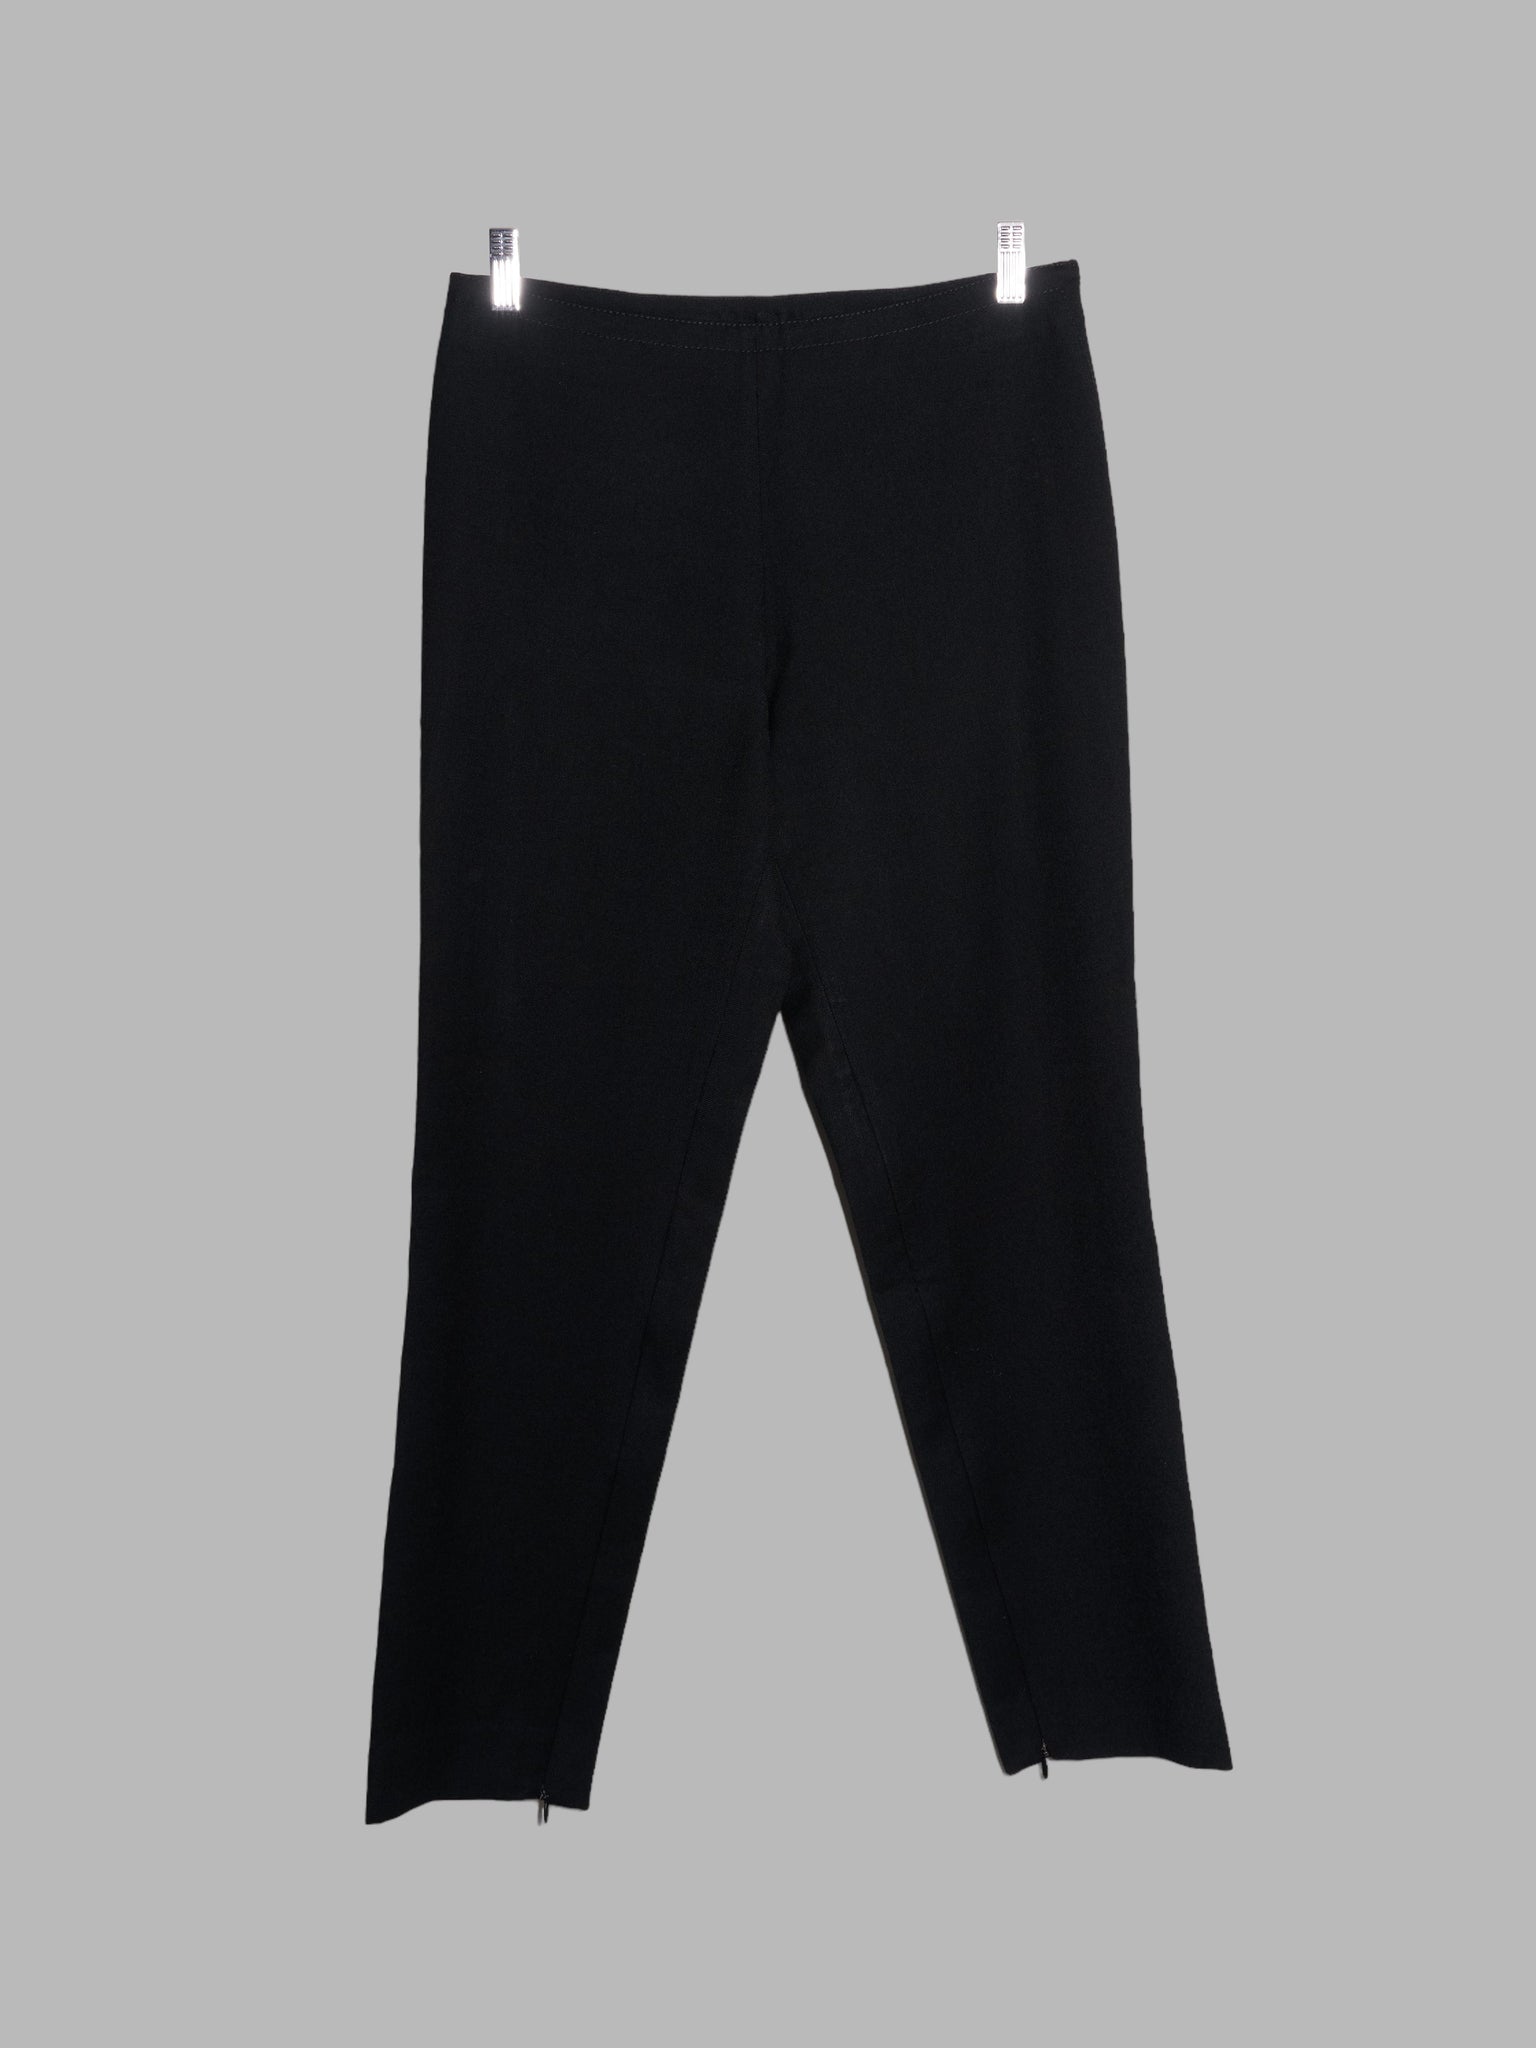 Dirk Bikkembergs 1990s 2000s black wool zipped cuff tapered trousers - size 42